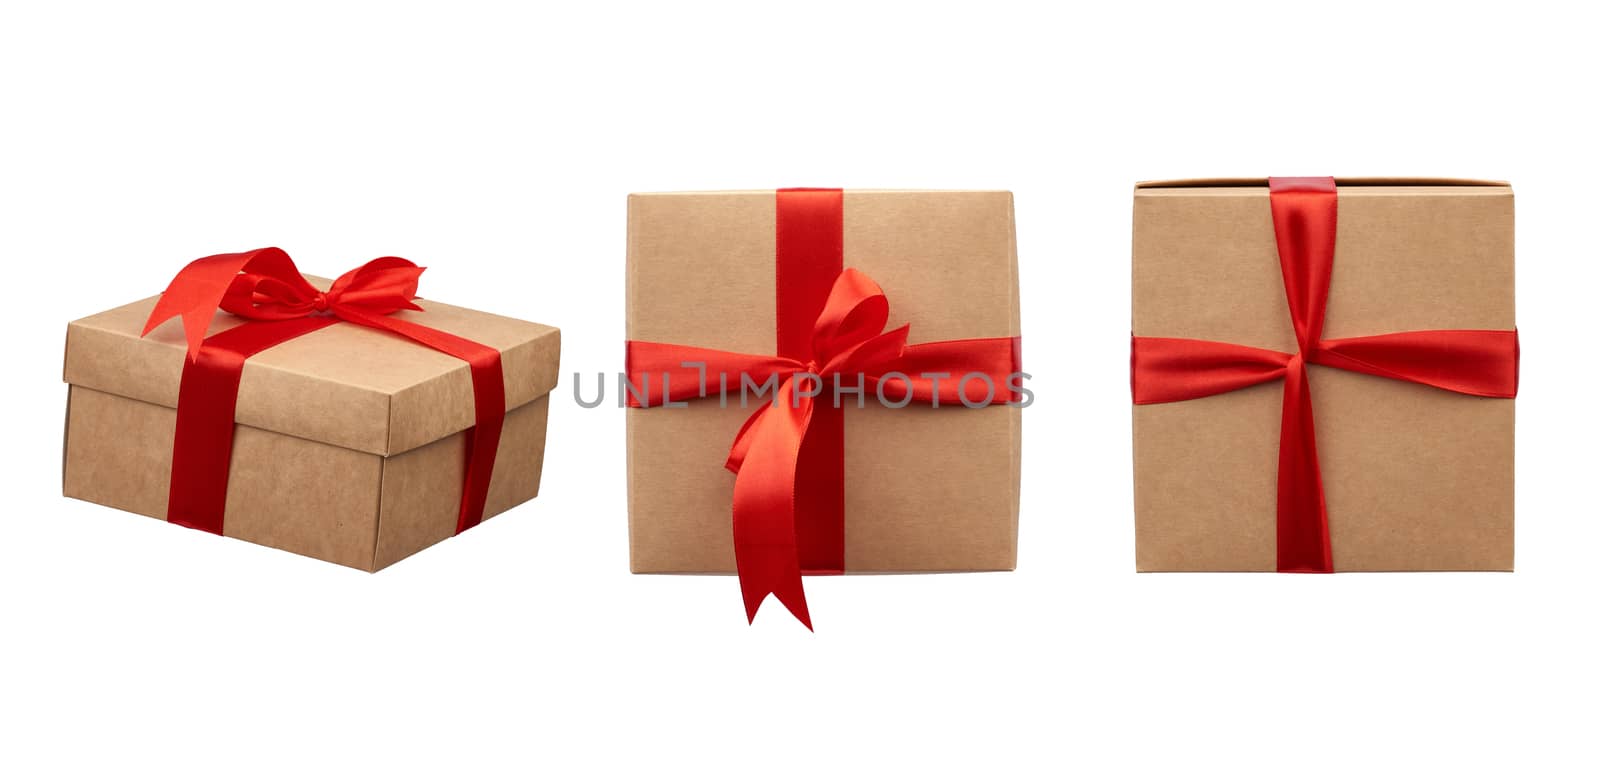 square box wrapped in brown kraft paper and tied with a silk red ribbon, box bottom and top view